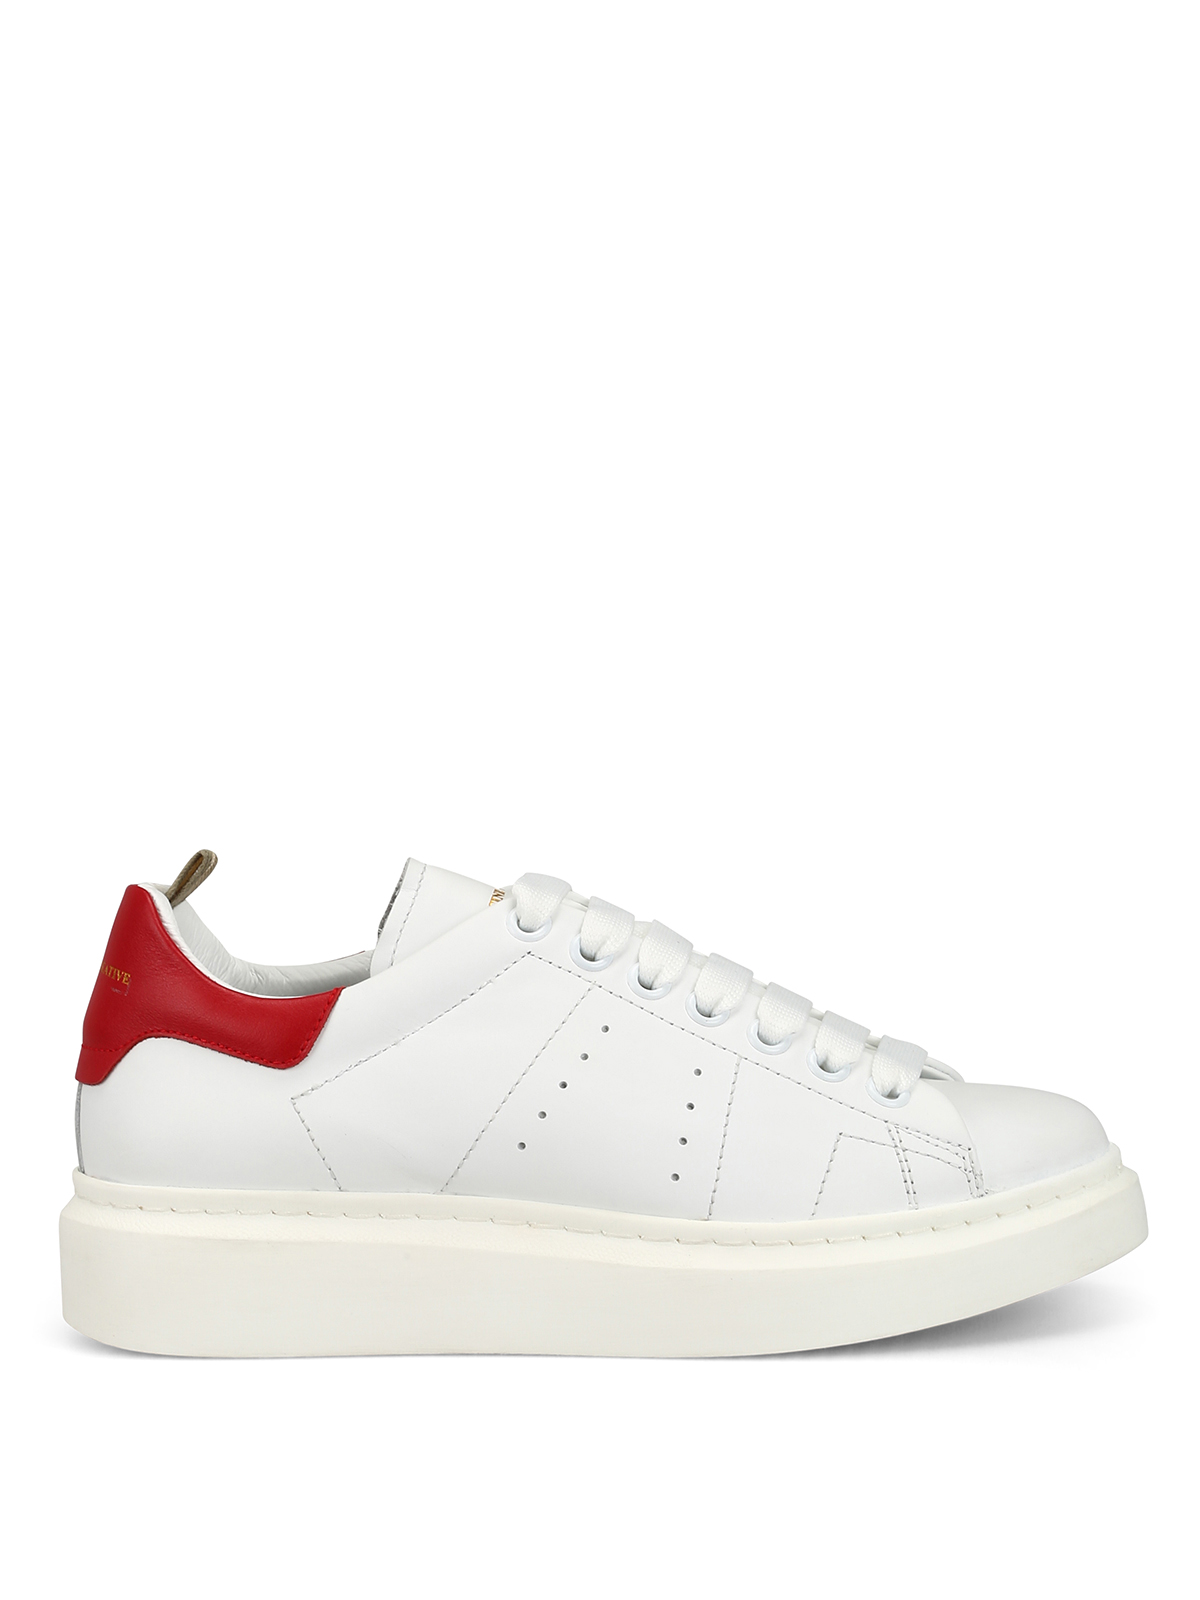 Trainers Officine Creative - Krace white leather sneakers ...